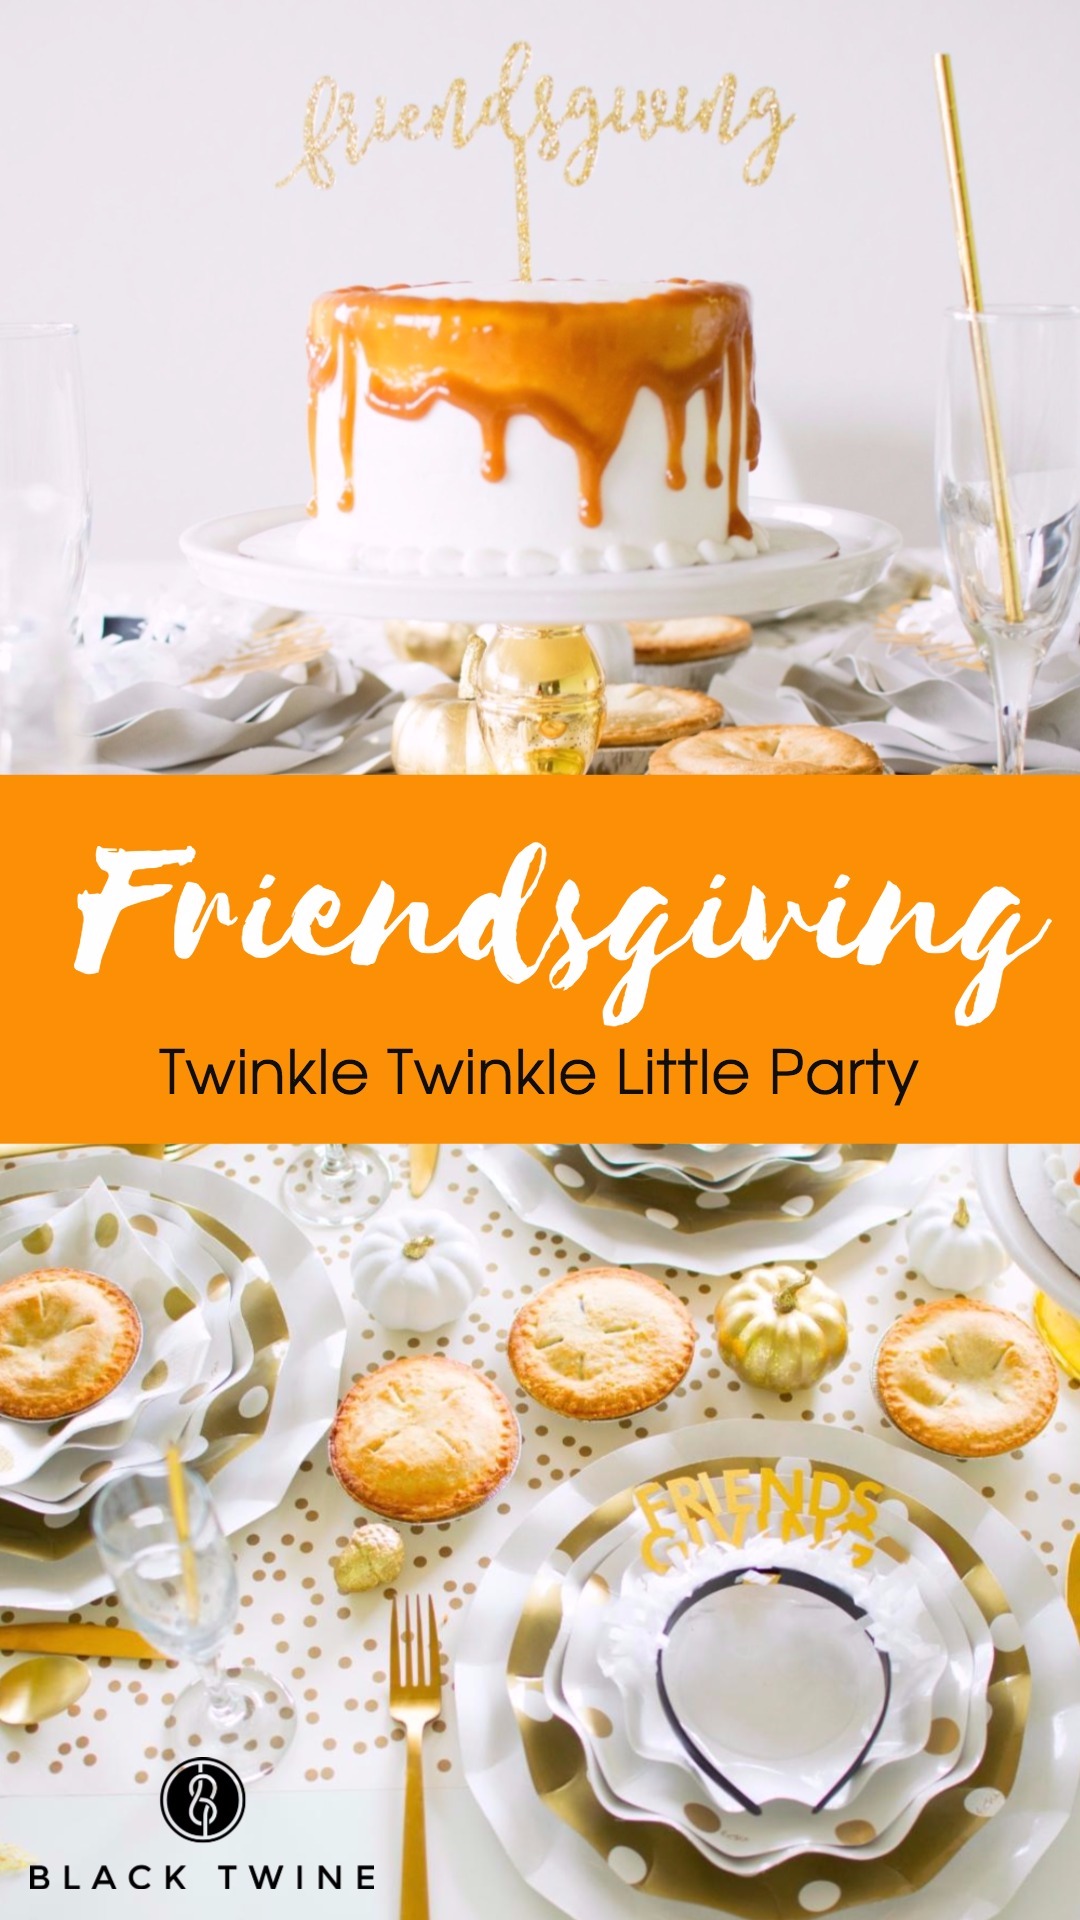 Friendsgiving Cake Balloons Tablescape Place Settings Friendsgiving Thanksgiving Party by Twinkle Twinkle Little Party | Black Twine